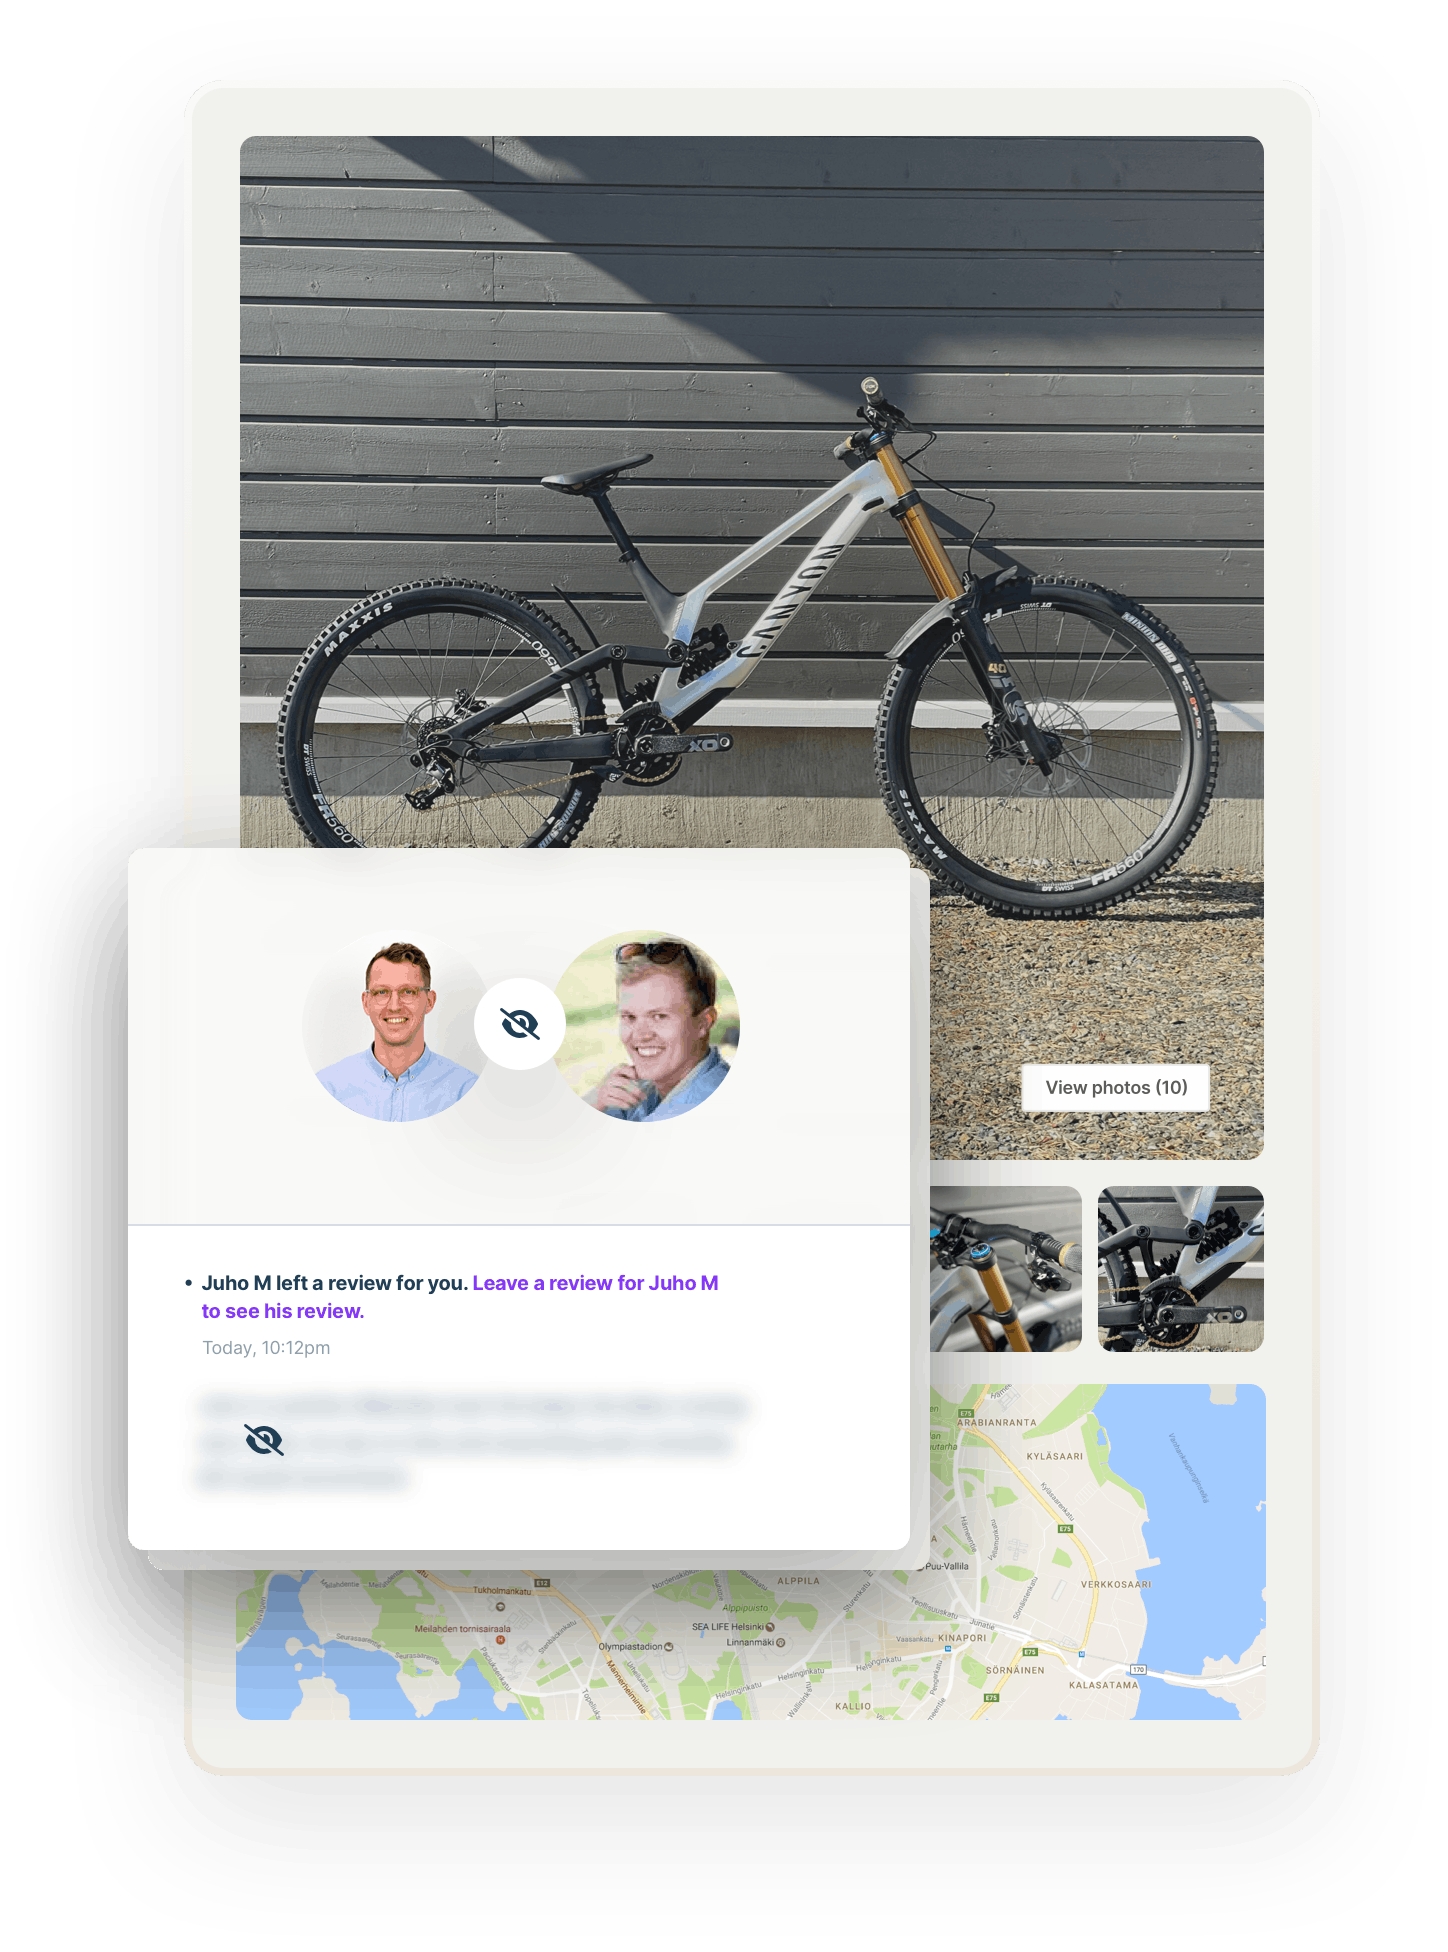 A listing on a rental marketplace with images and a map. Overlaid on top is a bix with the review flow. Sjoerd, the customer, is prompted to leave Juho, the bike owner, a review so that they can see the review they received in return.